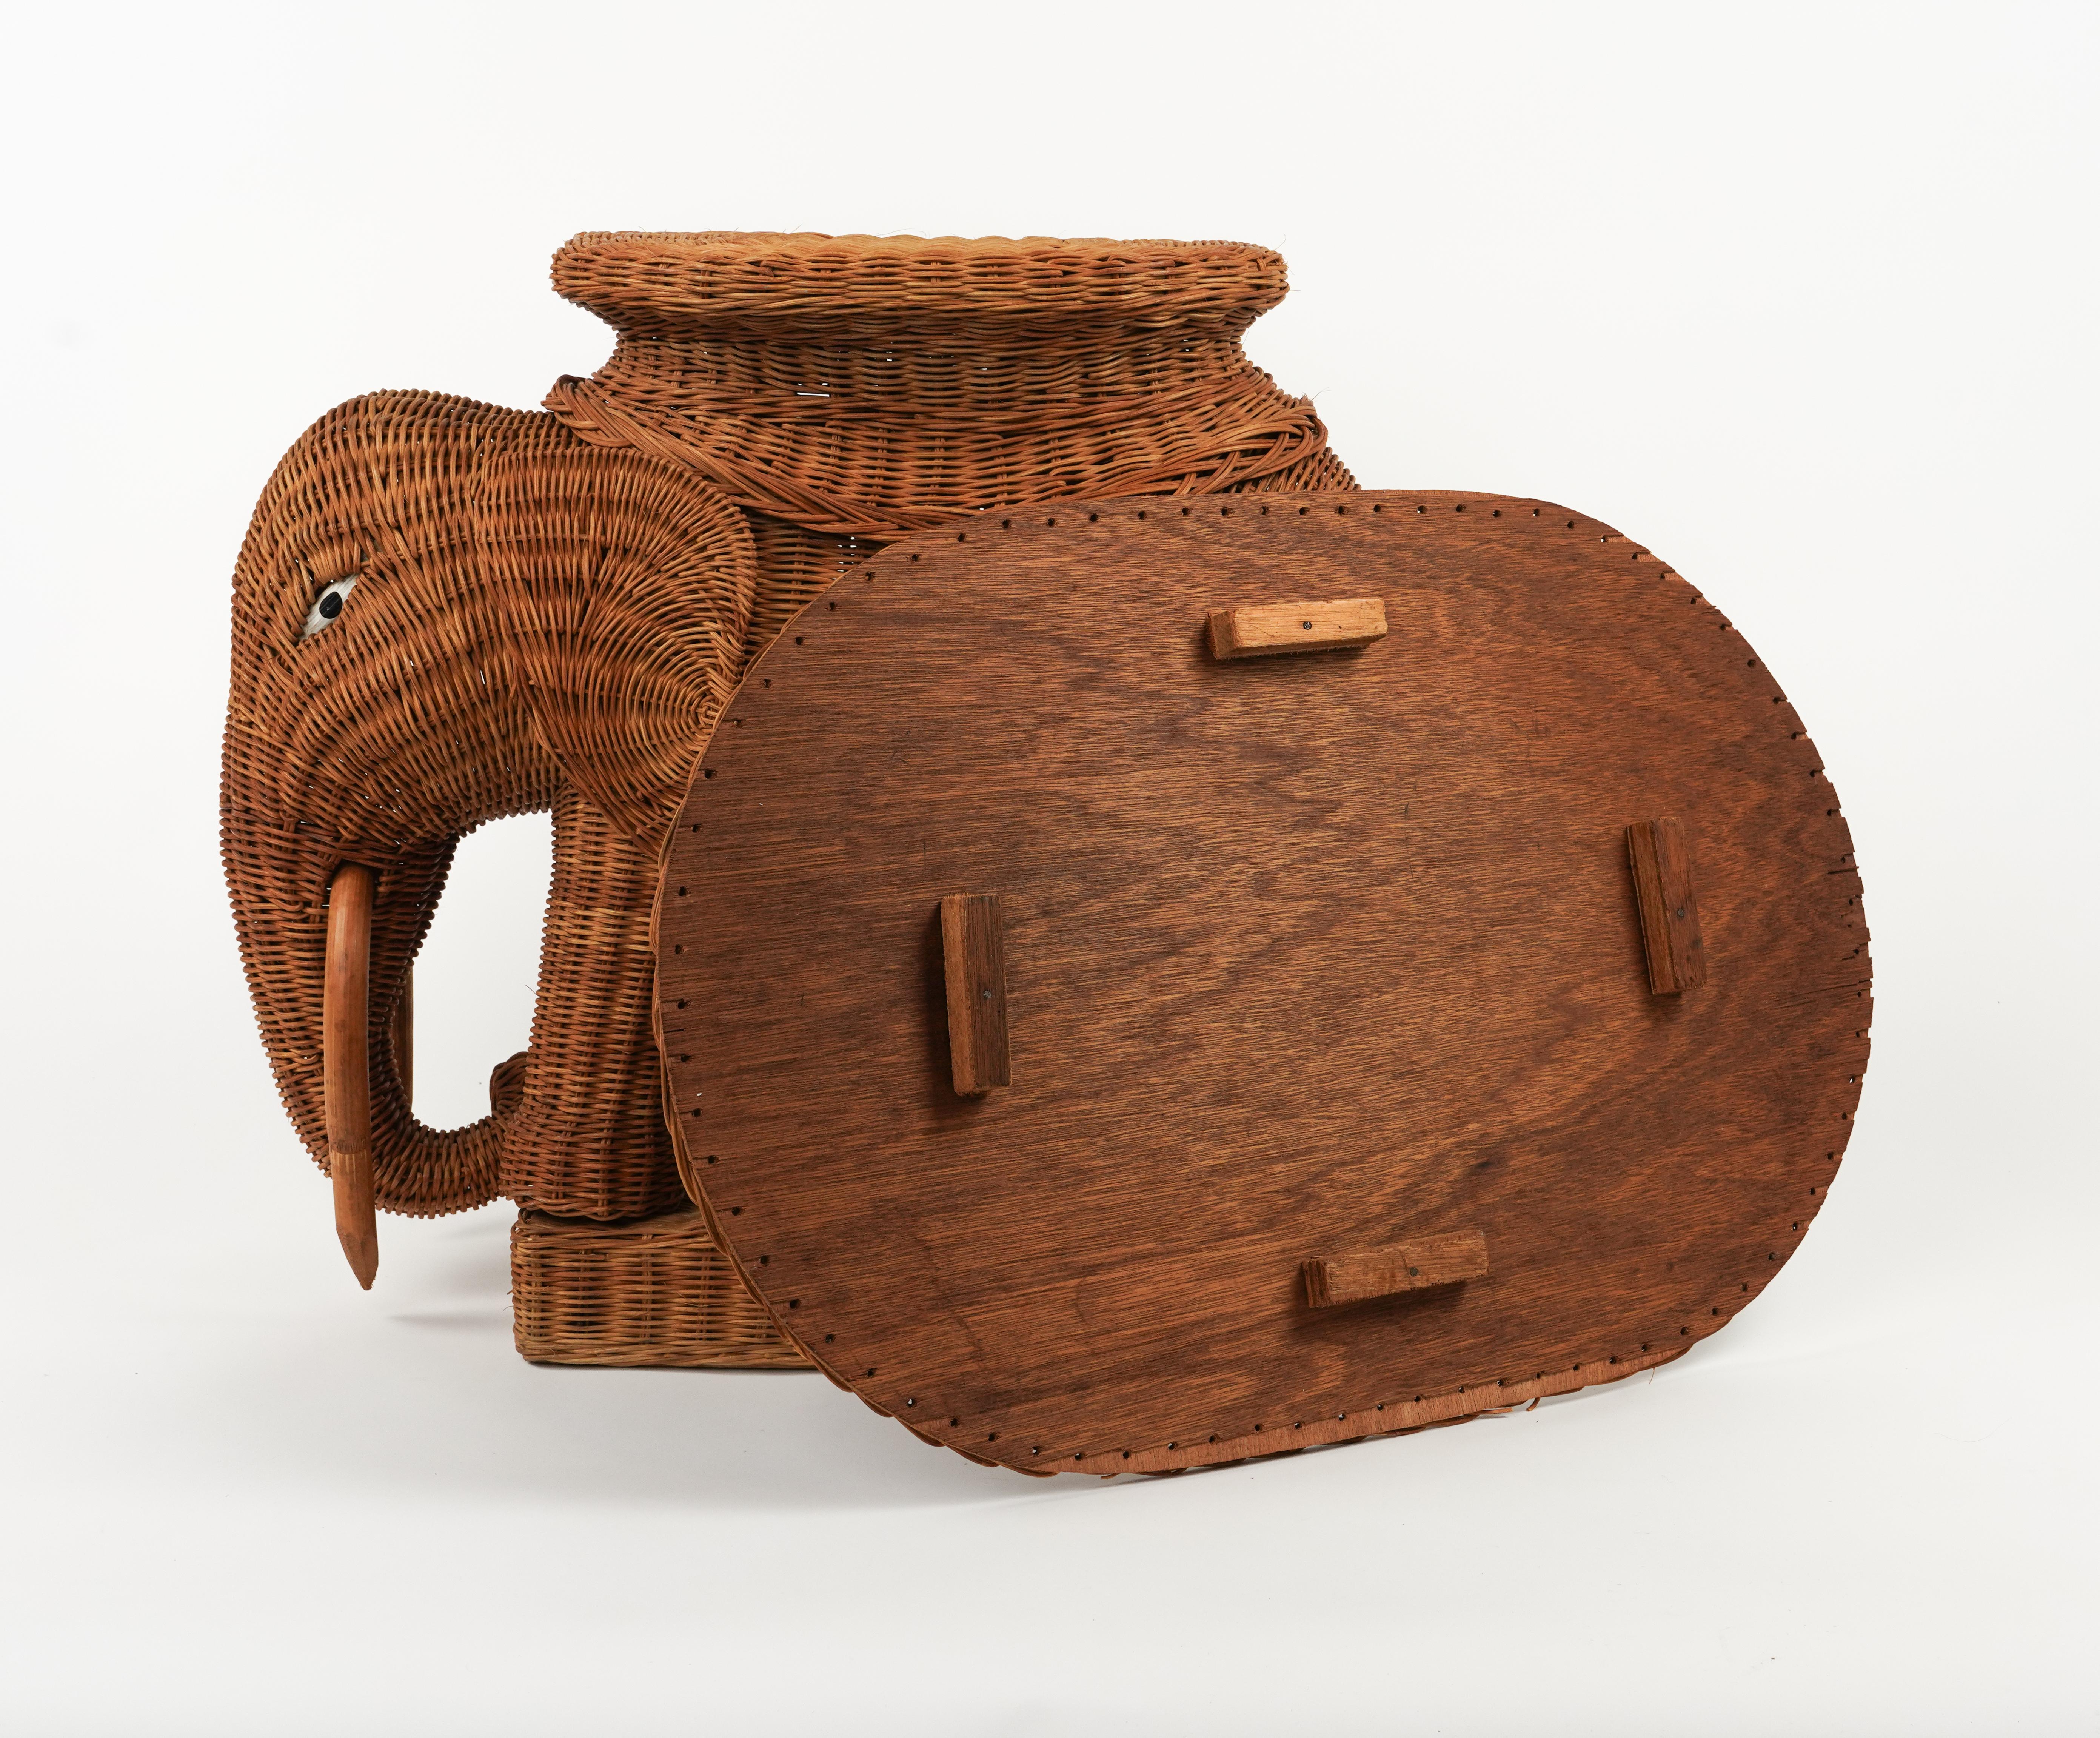 Rattan and Wicker Elephant Side Coffee Table Vivai Del Sud Style, Italy, 1960s For Sale 5